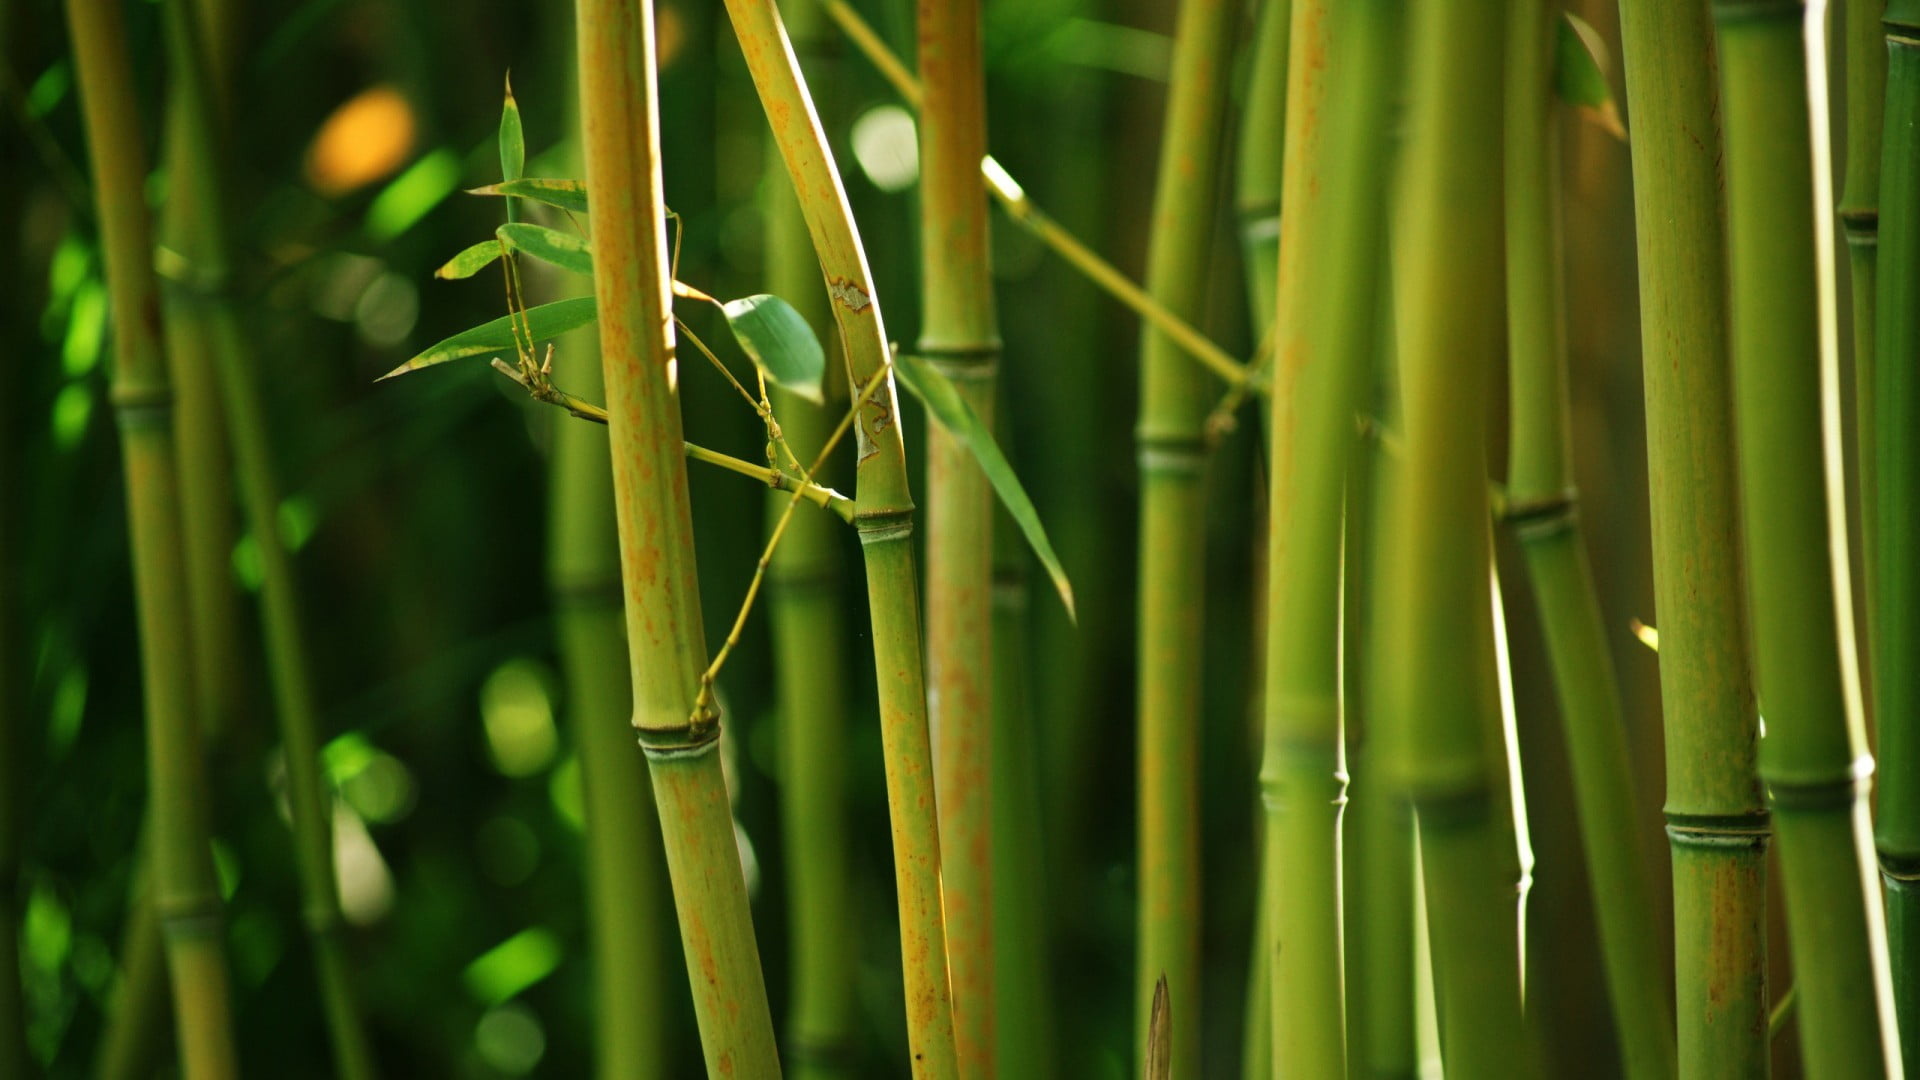 Green bamboo in nature, Close-up view, Depth of field, Natural beauty, 1920x1080 Full HD Desktop